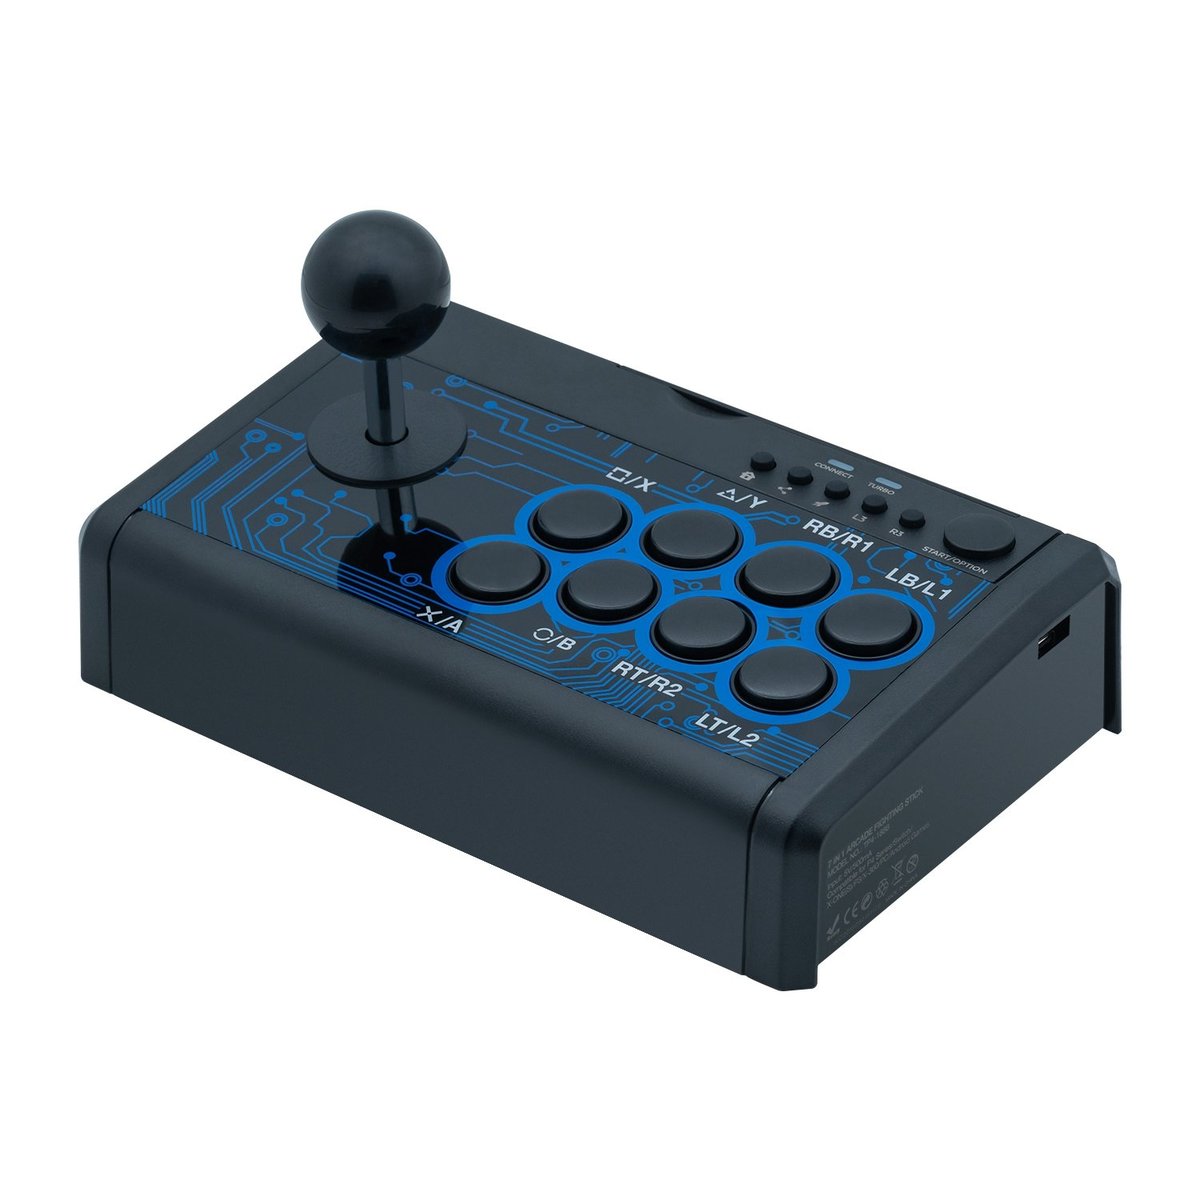 DOBE In Mini Arcade Fighting Stick for PS4/PS3/Xbox One/Xbox  360/Nintendo PC HKTVmall The Largest HK Shopping  Platform